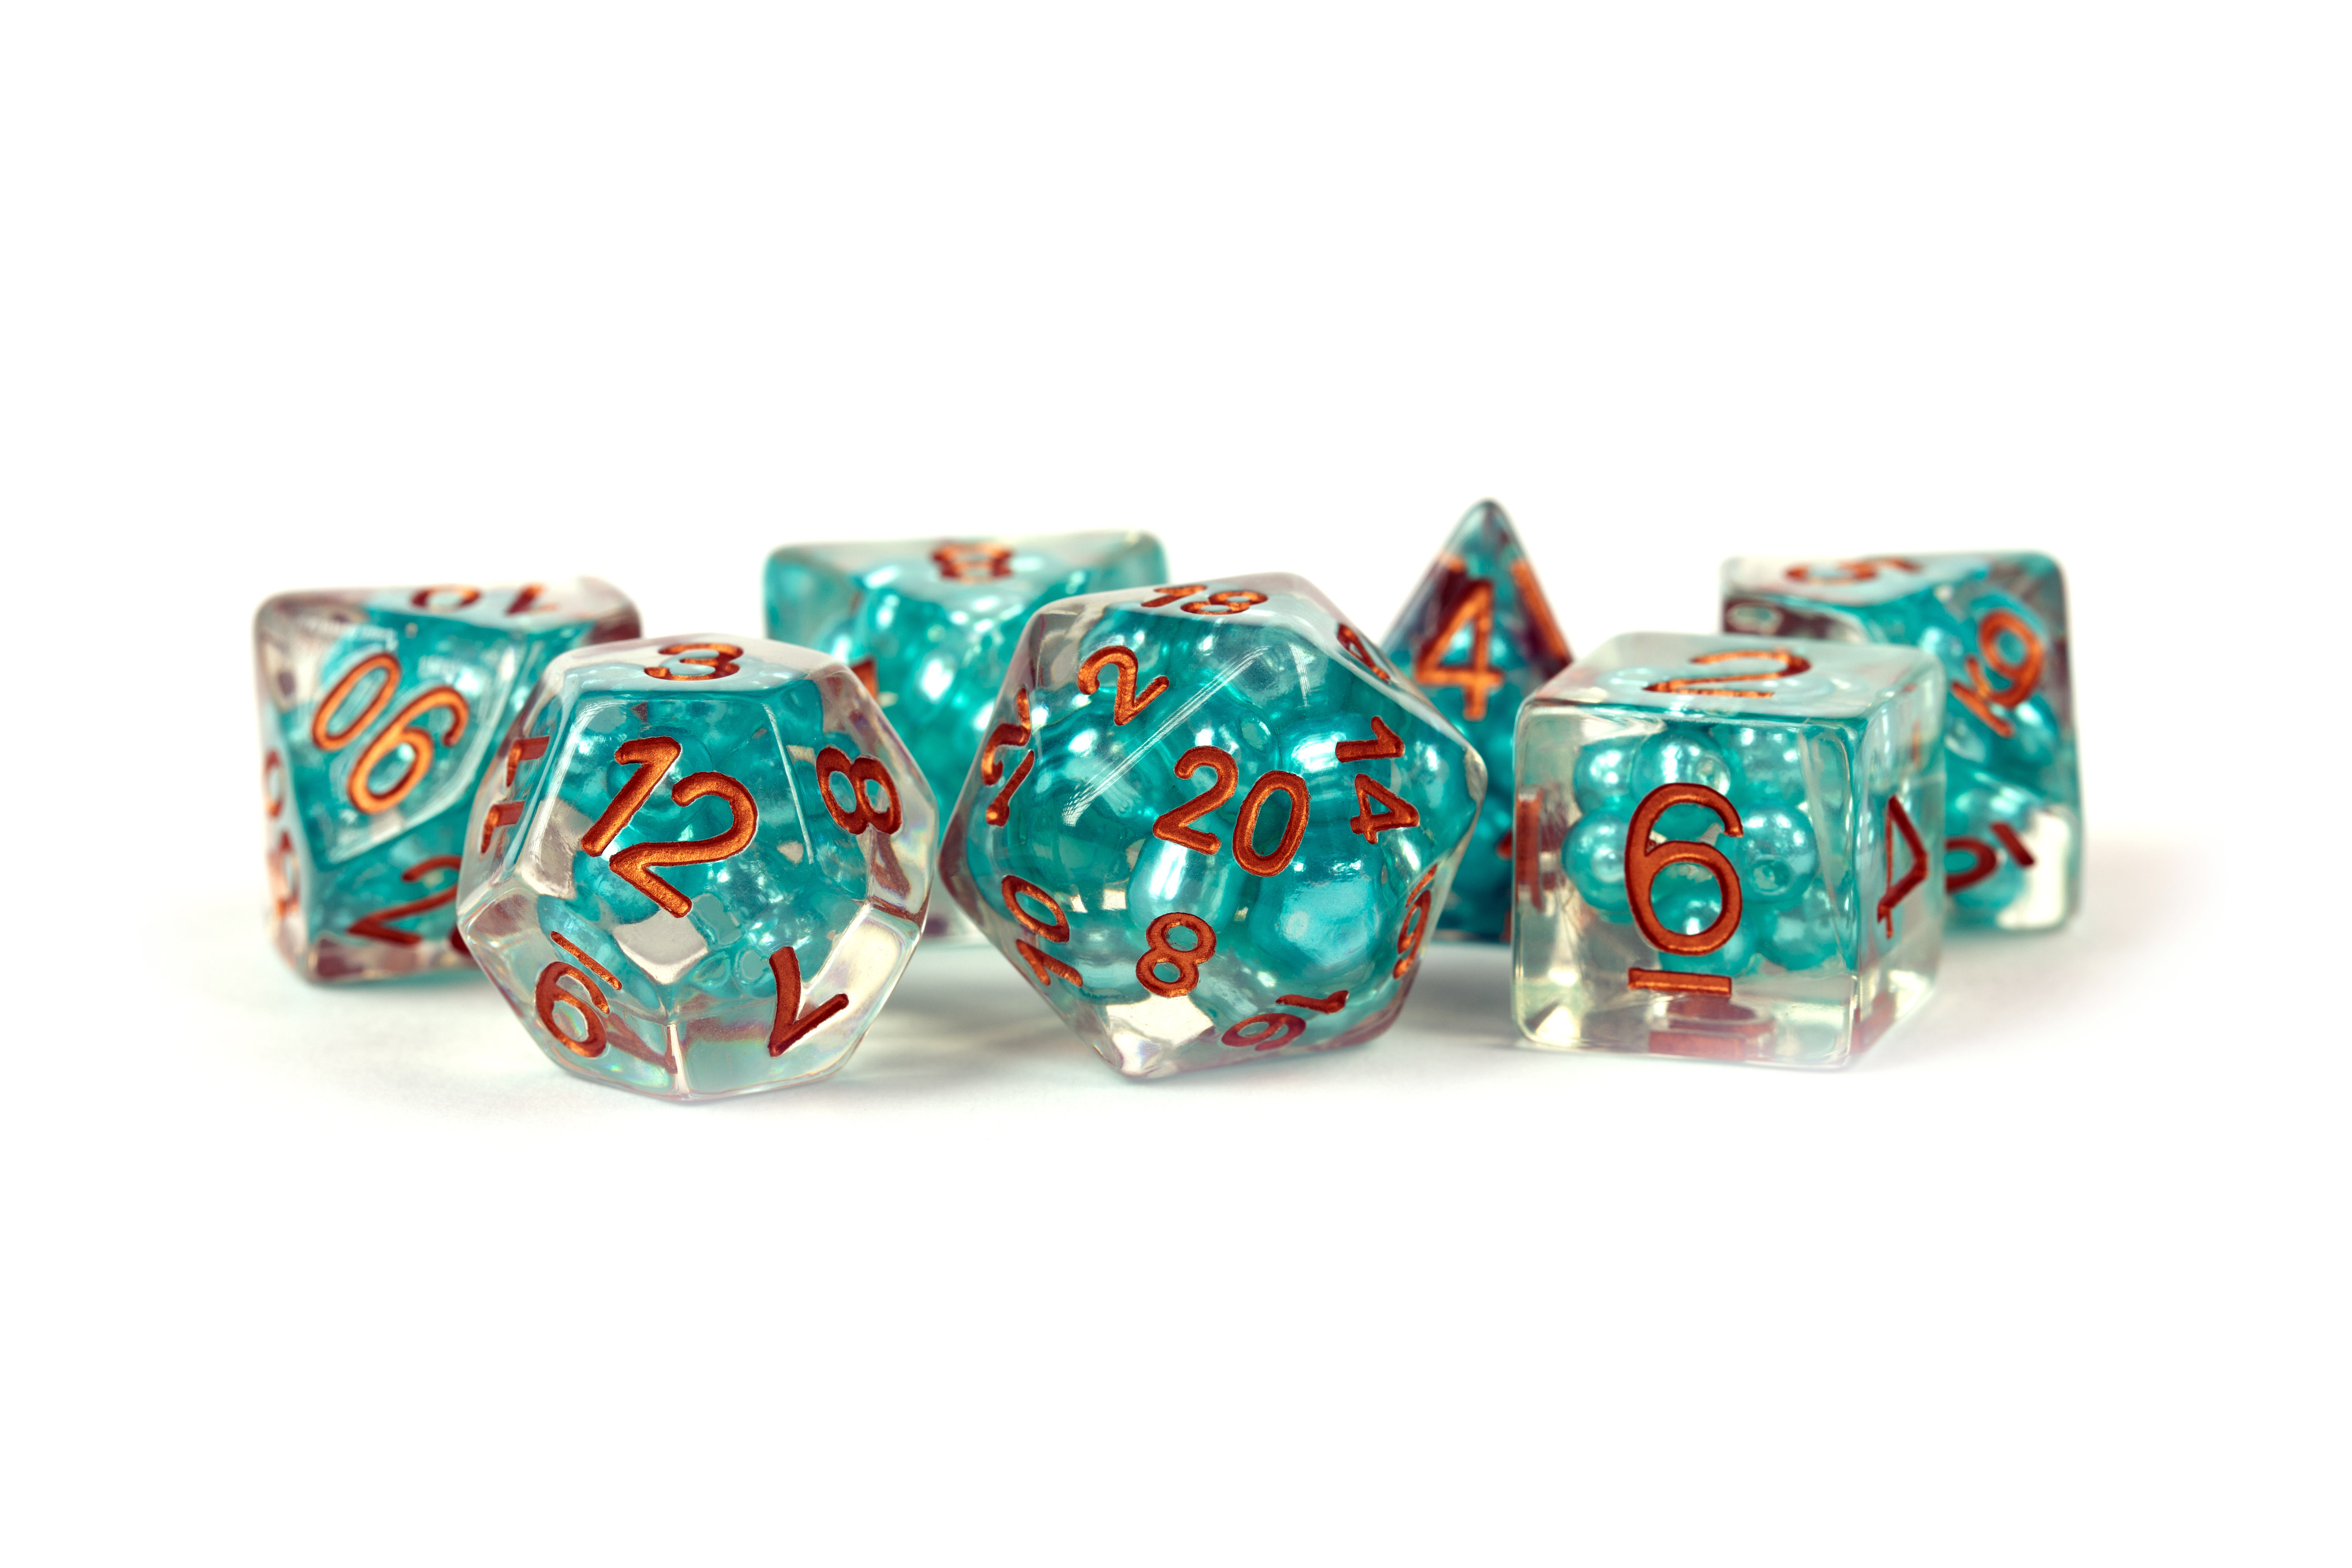 Pearl Resin 16mm Poly Dice Set : Teal /Copper Numbers (7)